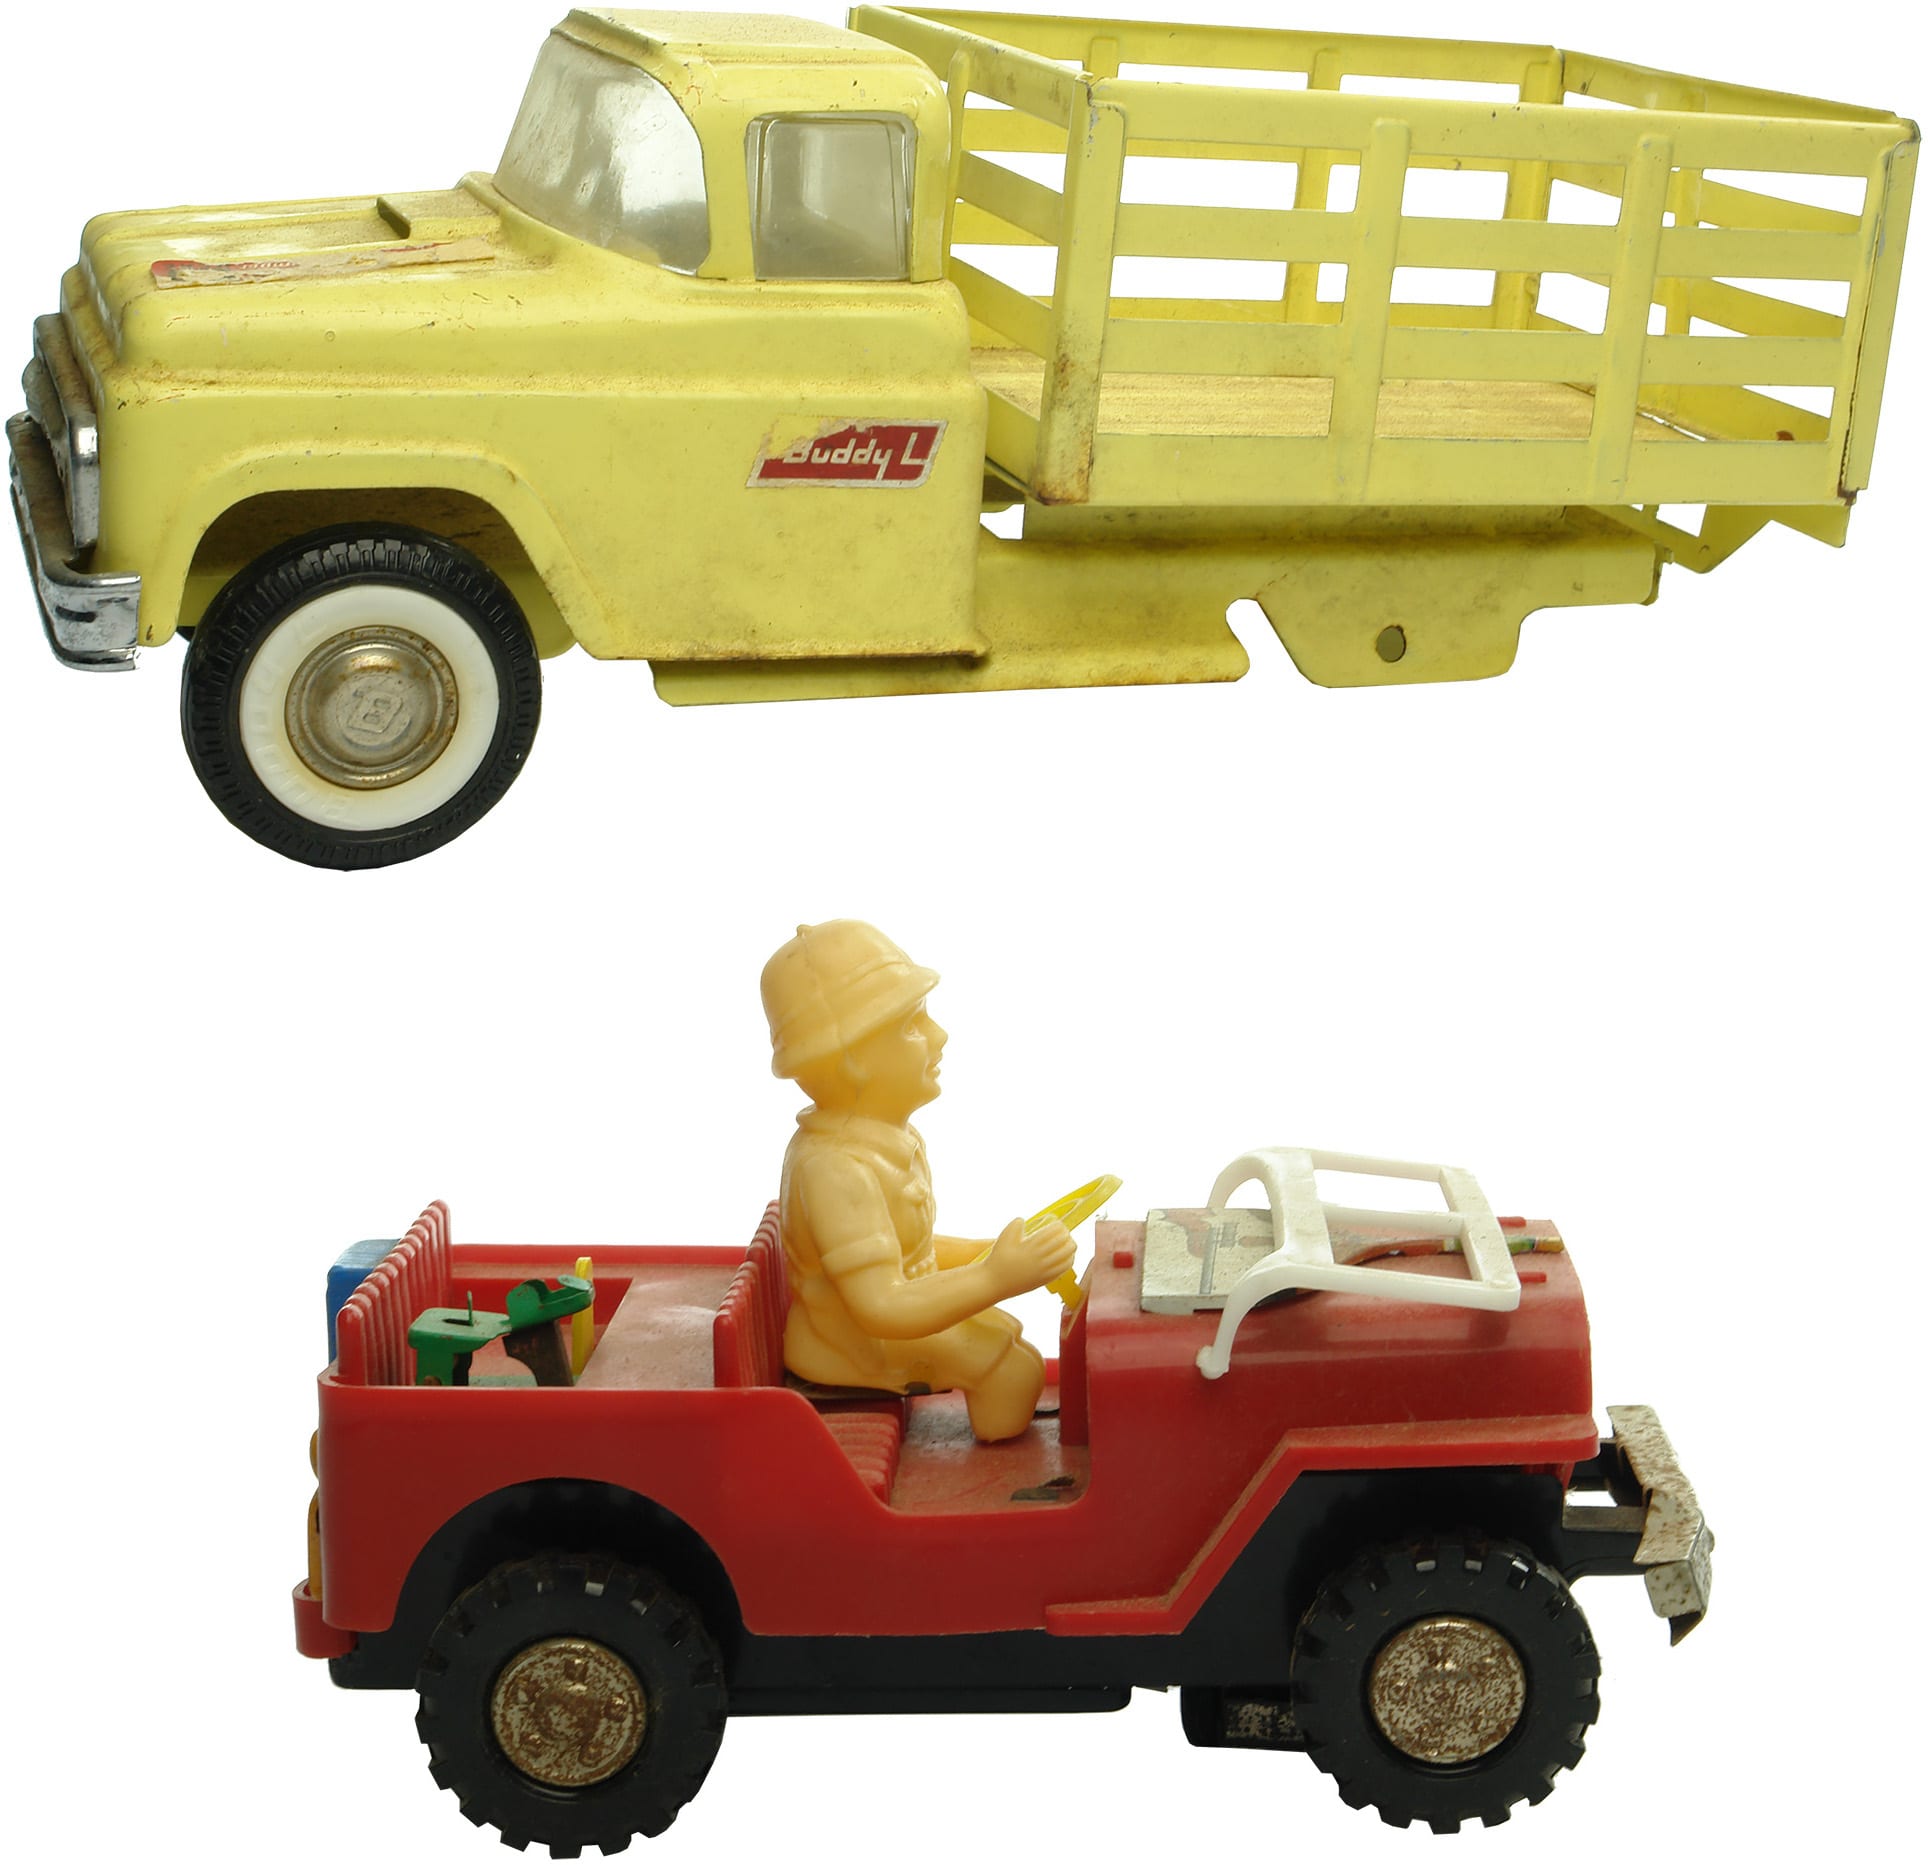 Old Truck Toys